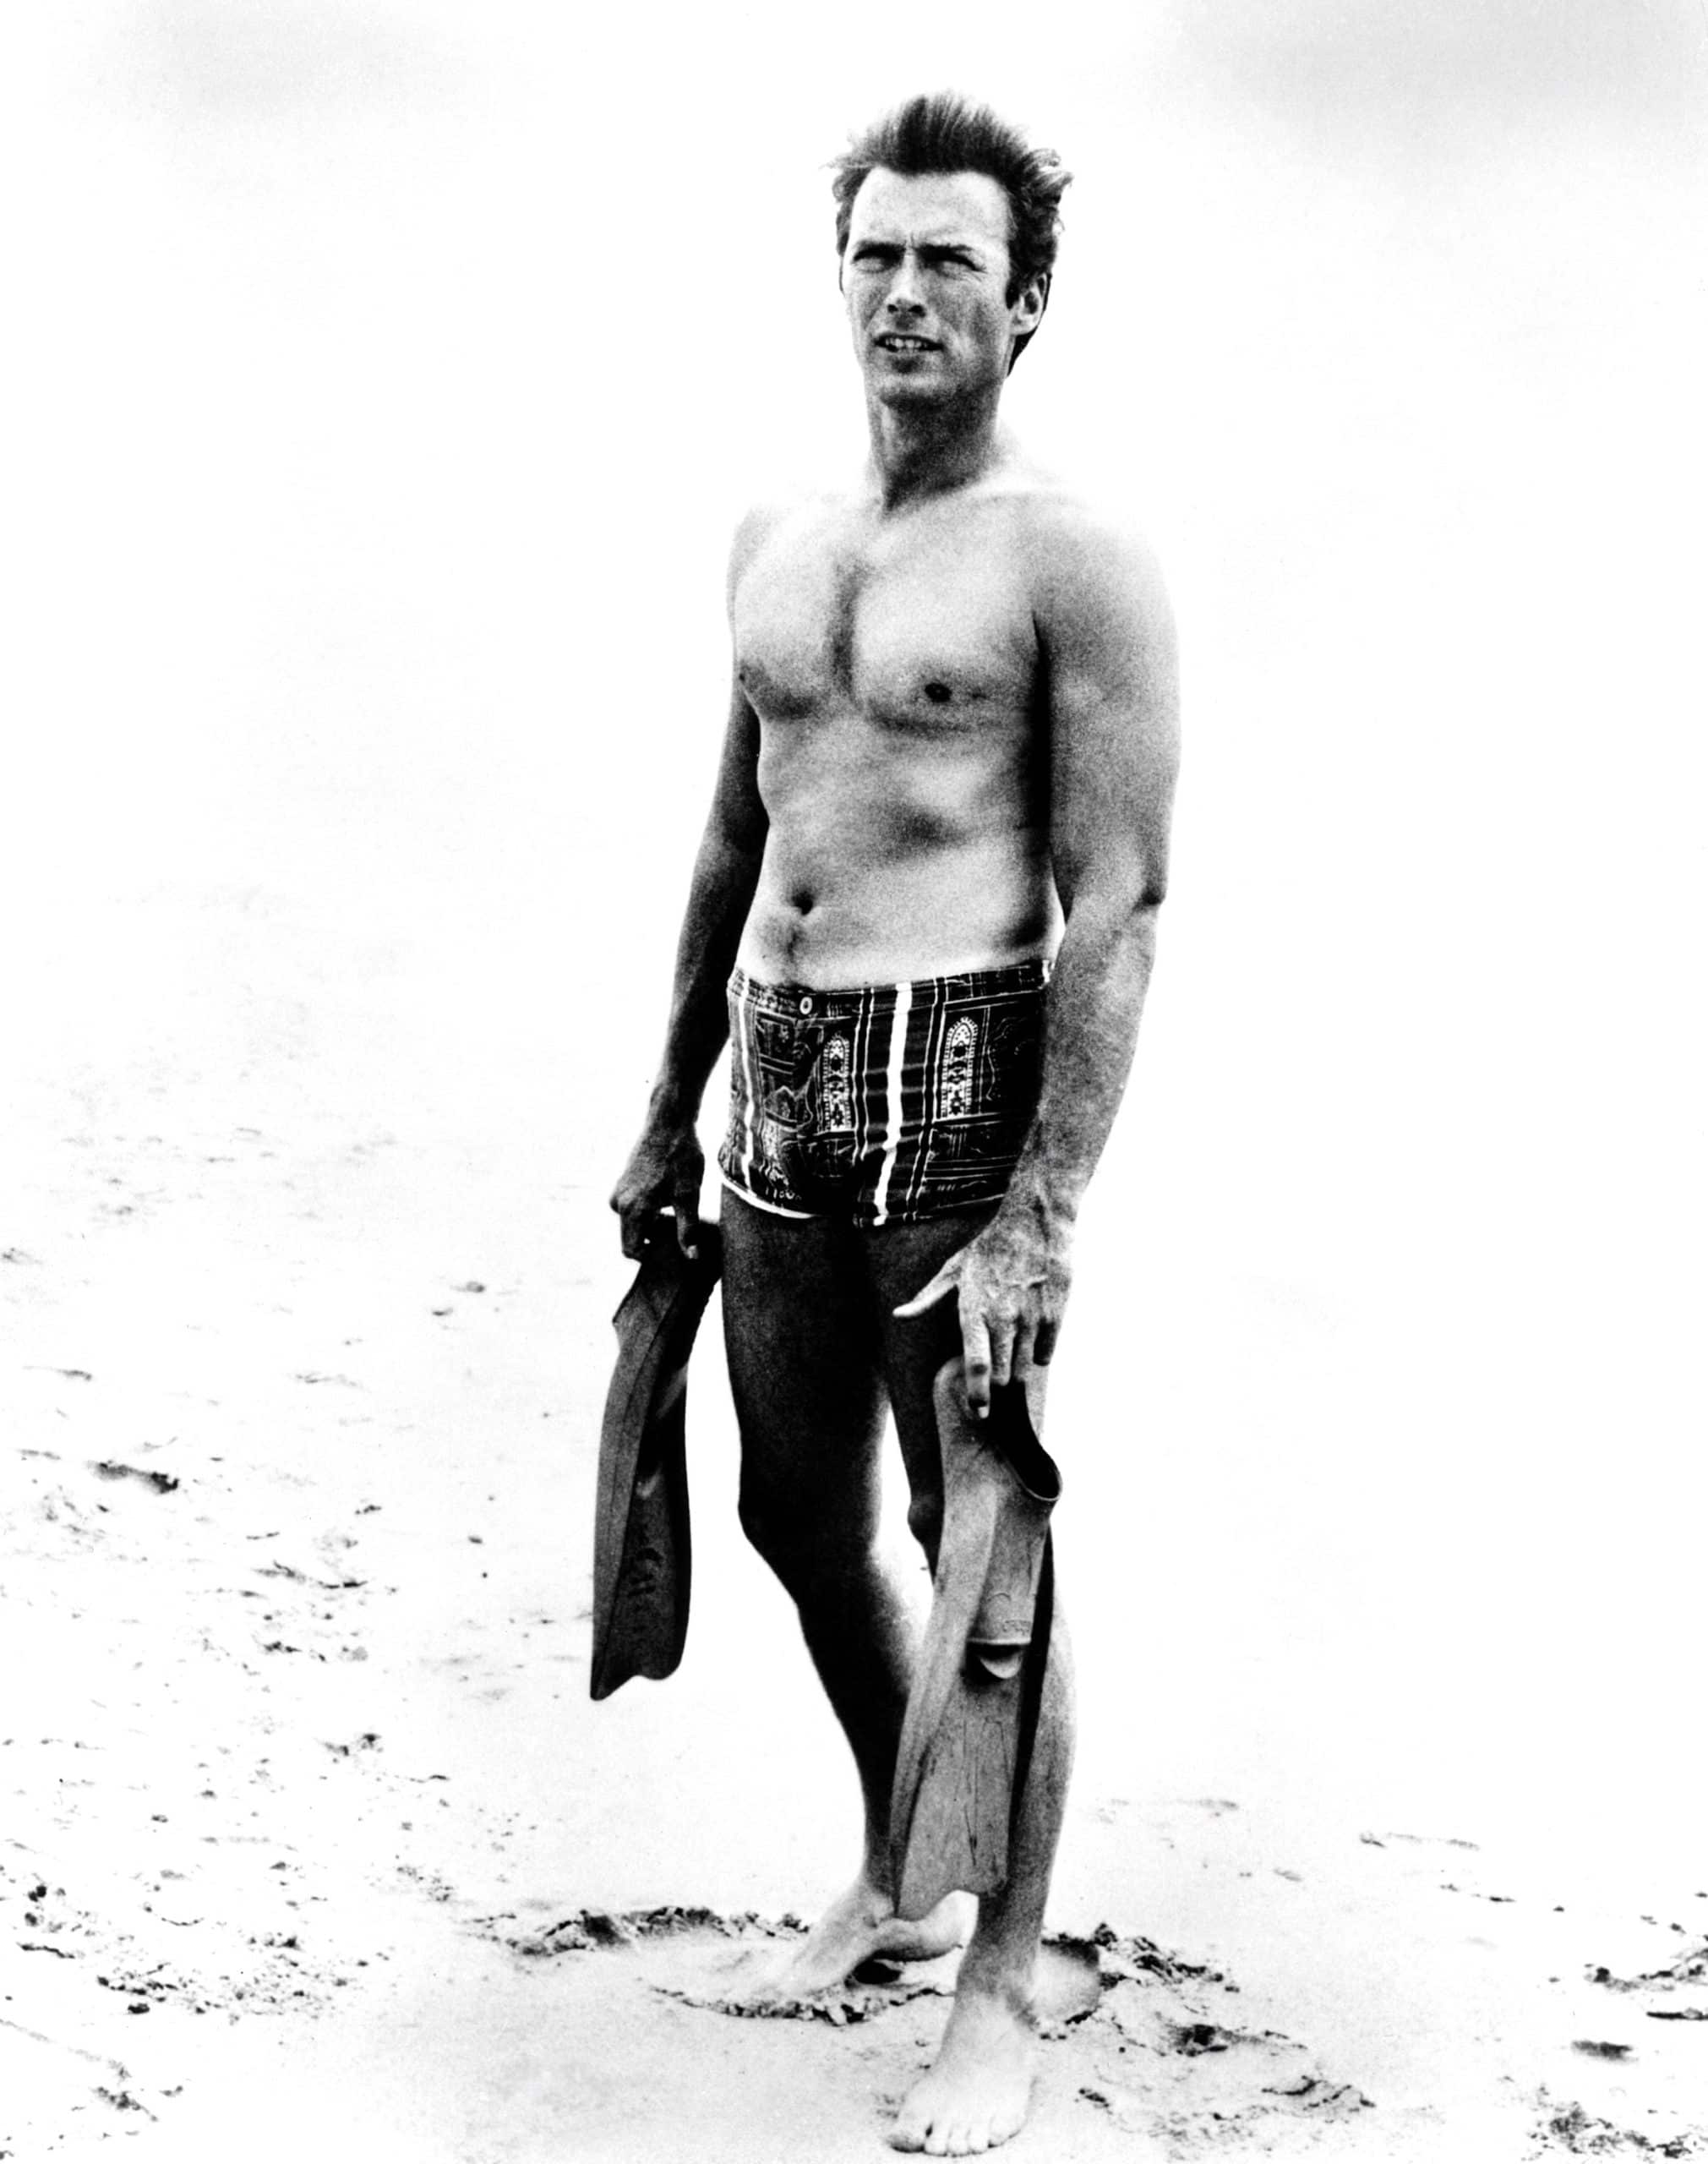 Clint Eastwood, ca. early 1970s